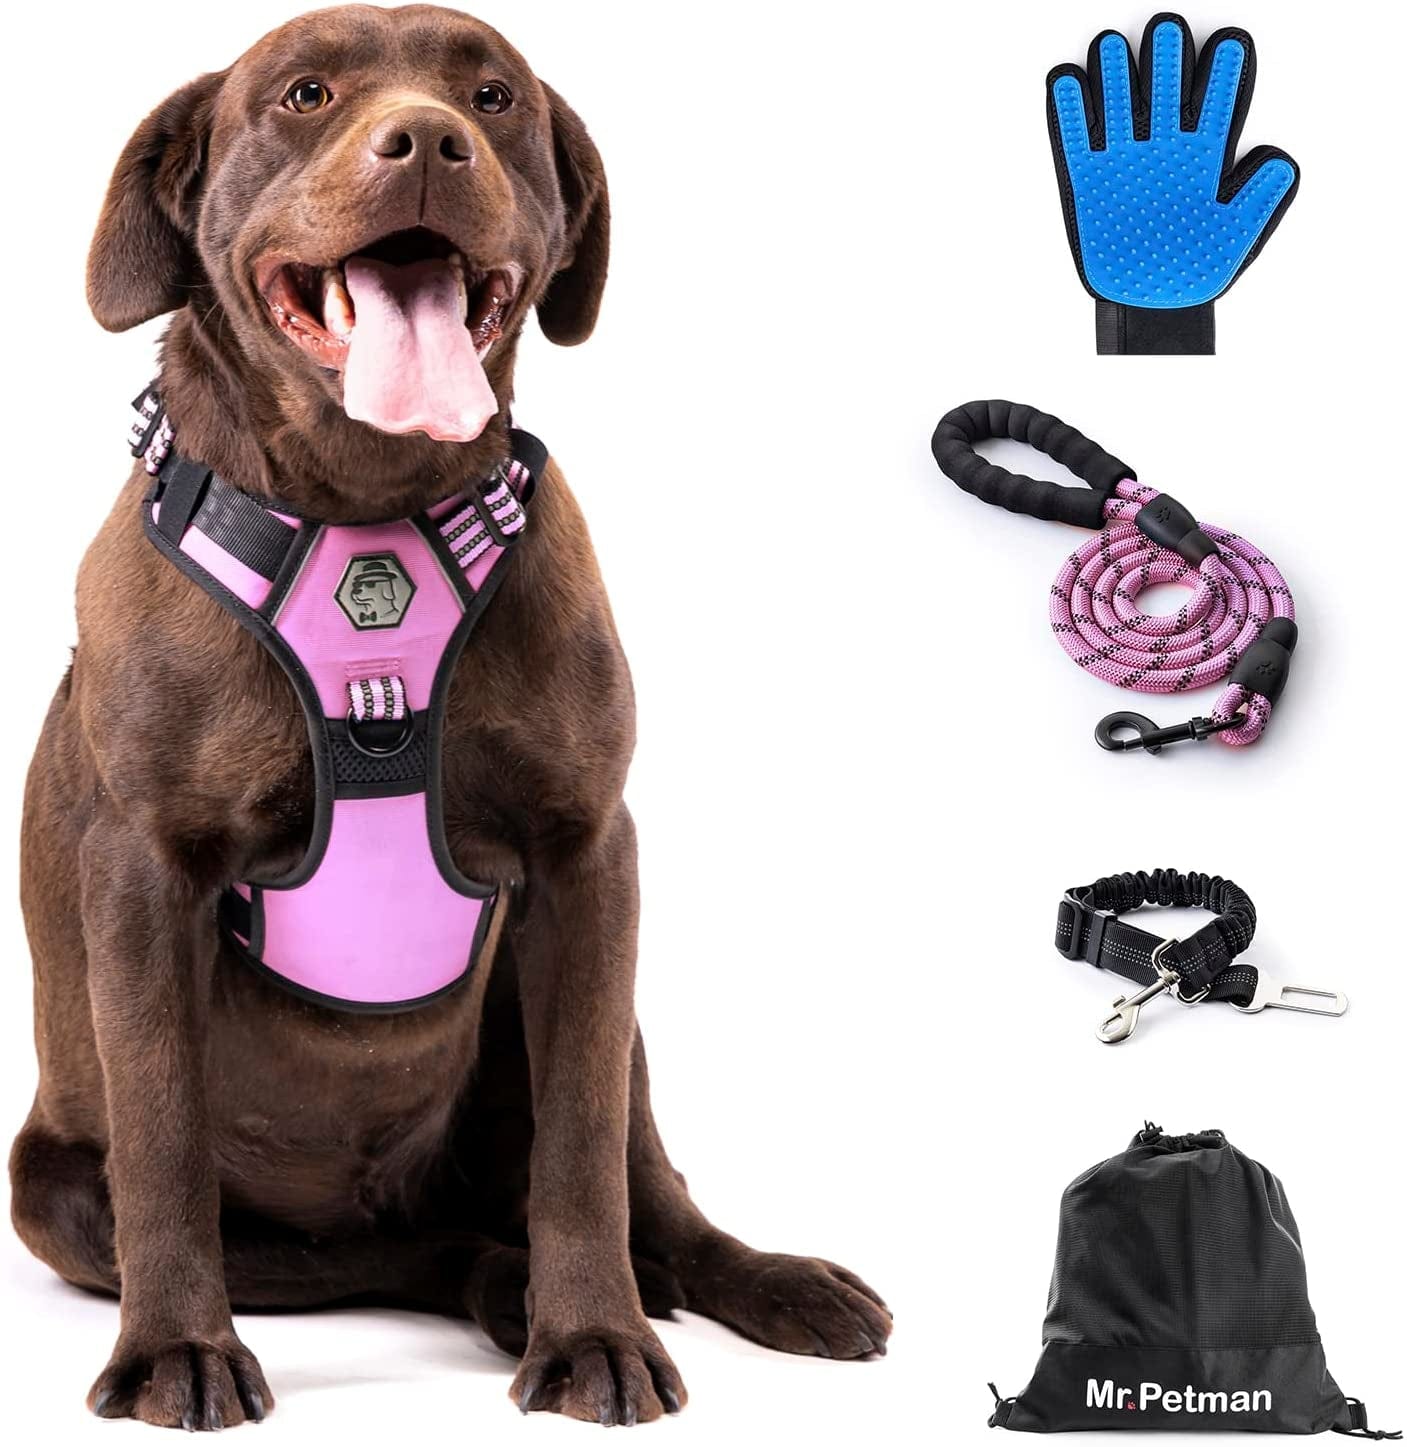 MR. PETMAN No Pull Dog Harness with Leash, Seat Belt, Grooming Glove - No Choke Dog Harness Set for Small Medium Large Dogs- Reflective Adjustable Dog Vest Harnesses with Handle for Walking Training Animals & Pet Supplies > Pet Supplies > Dog Supplies > Dog Apparel Mr. Petman Baby Pink X-Large 